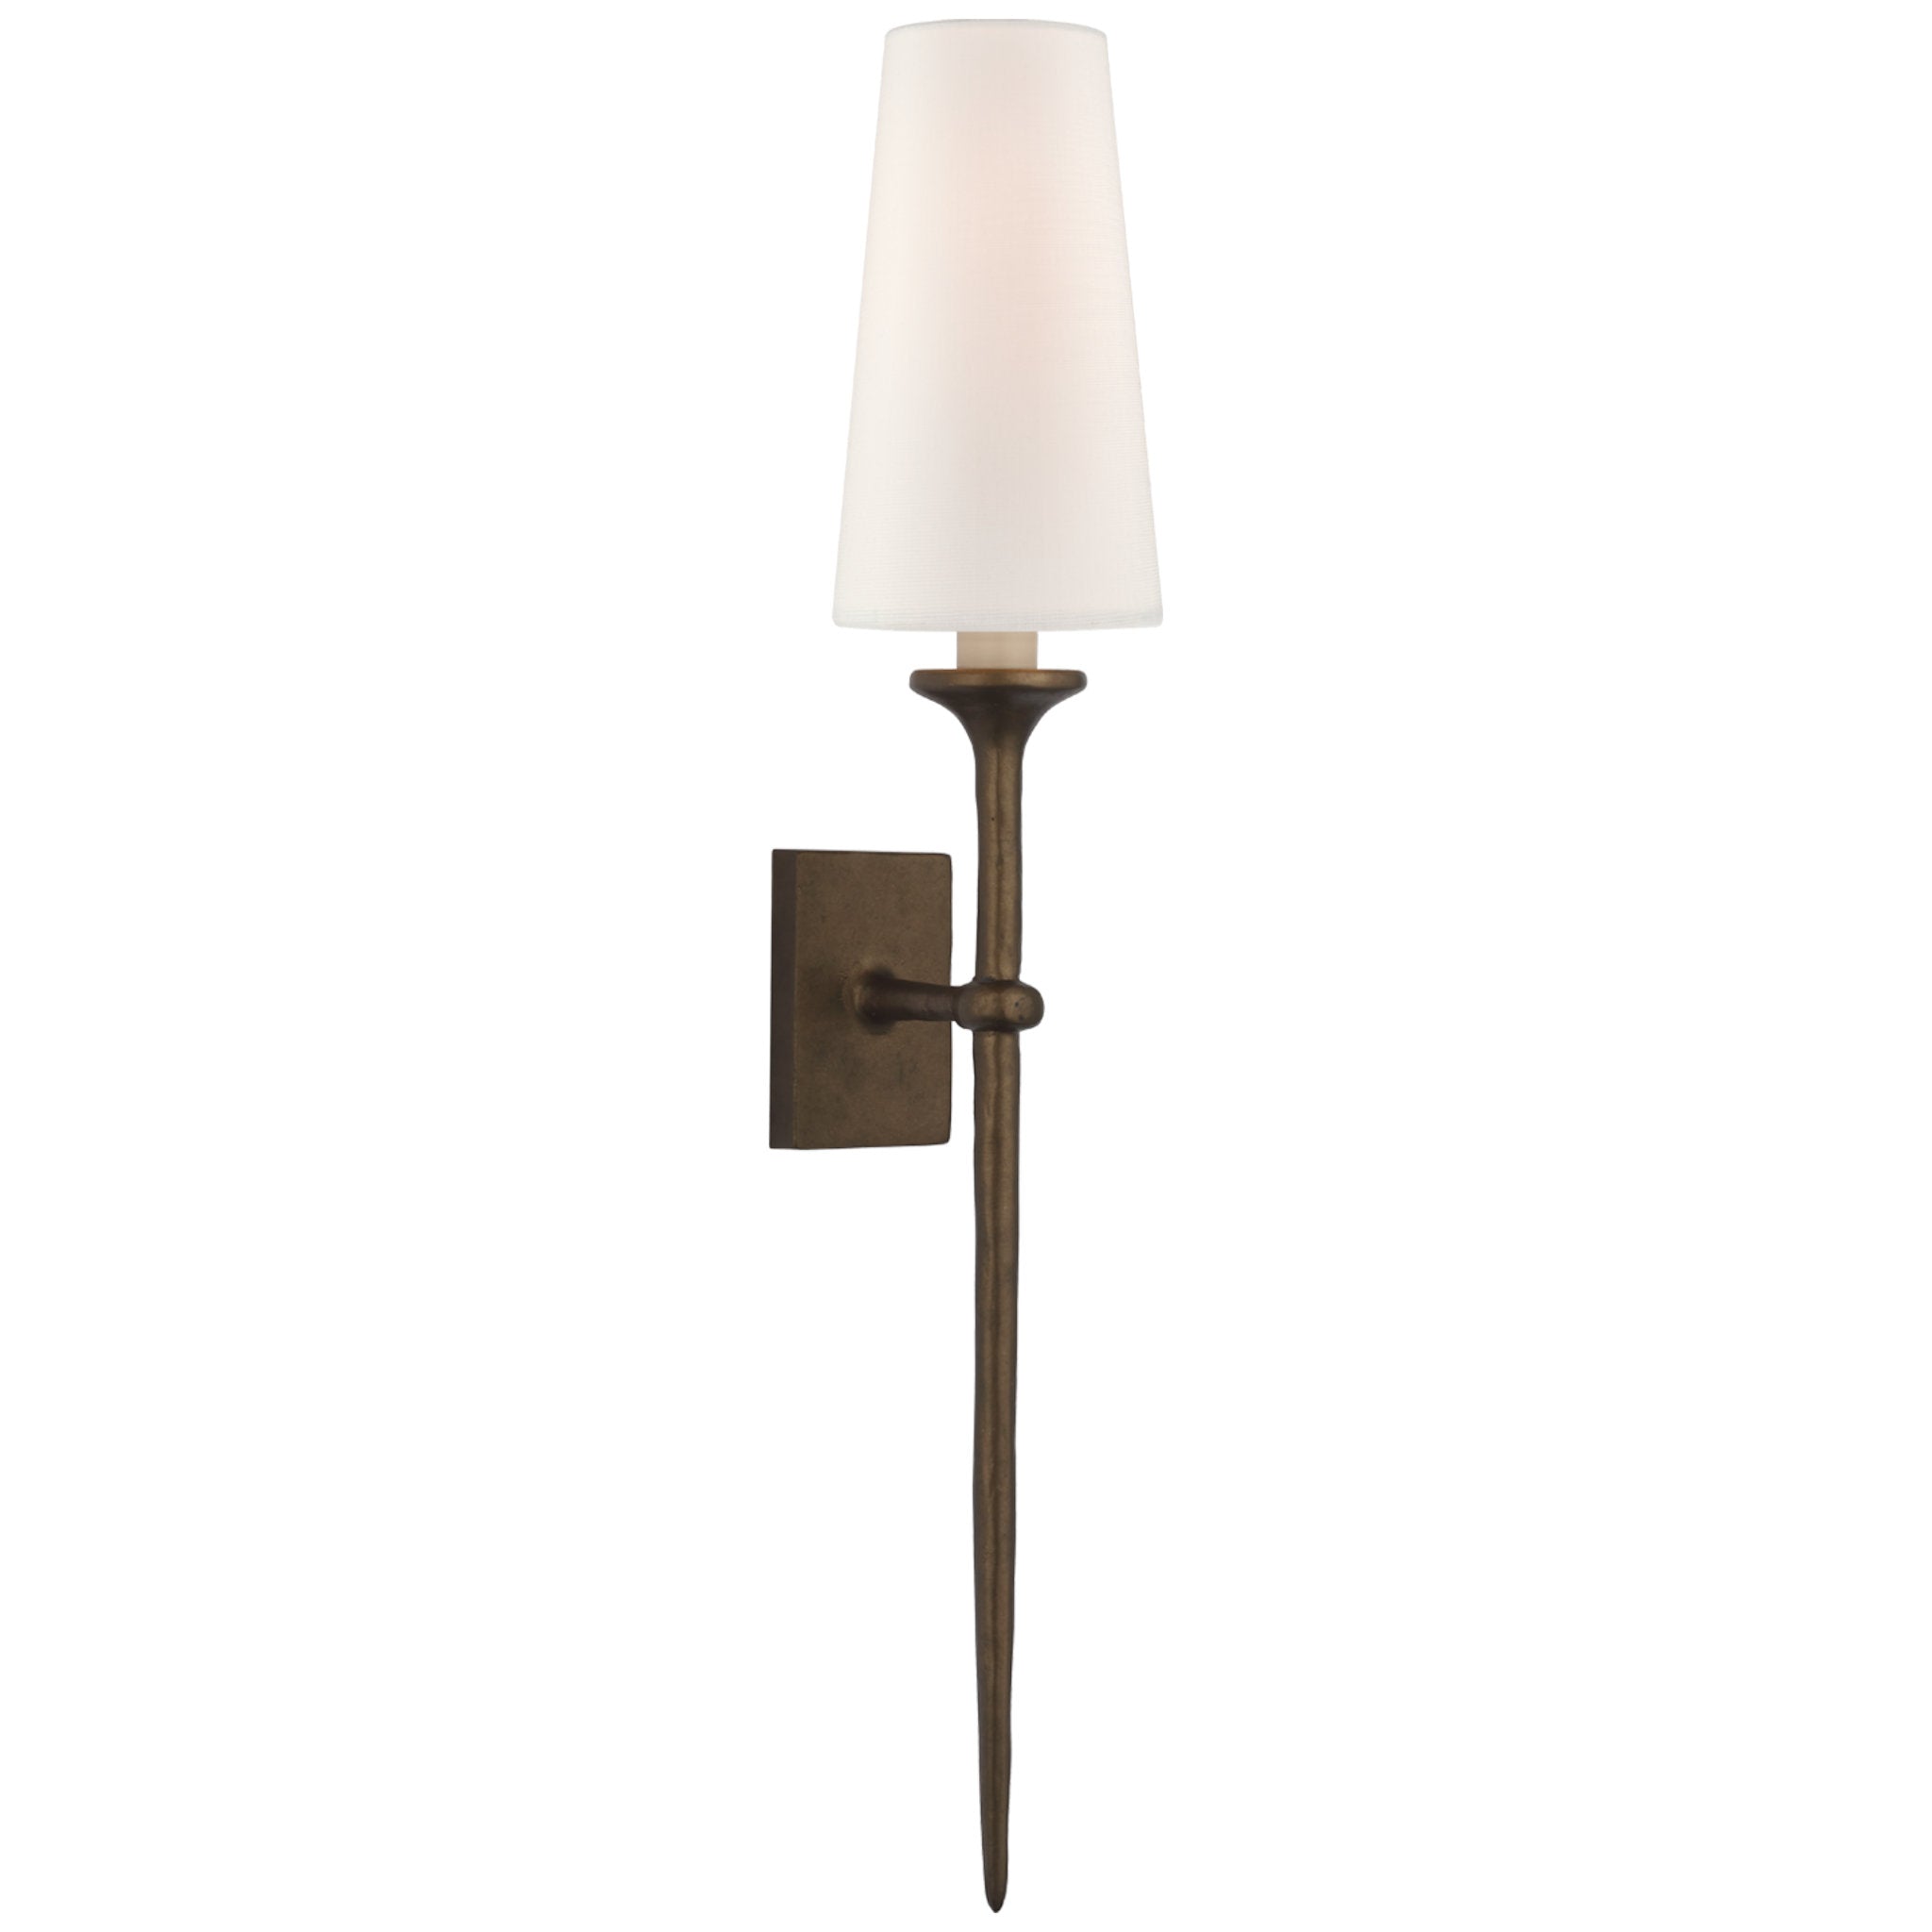 Julie Neill Iberia Single Sconce in Antique Bronze Leaf with Linen Shade